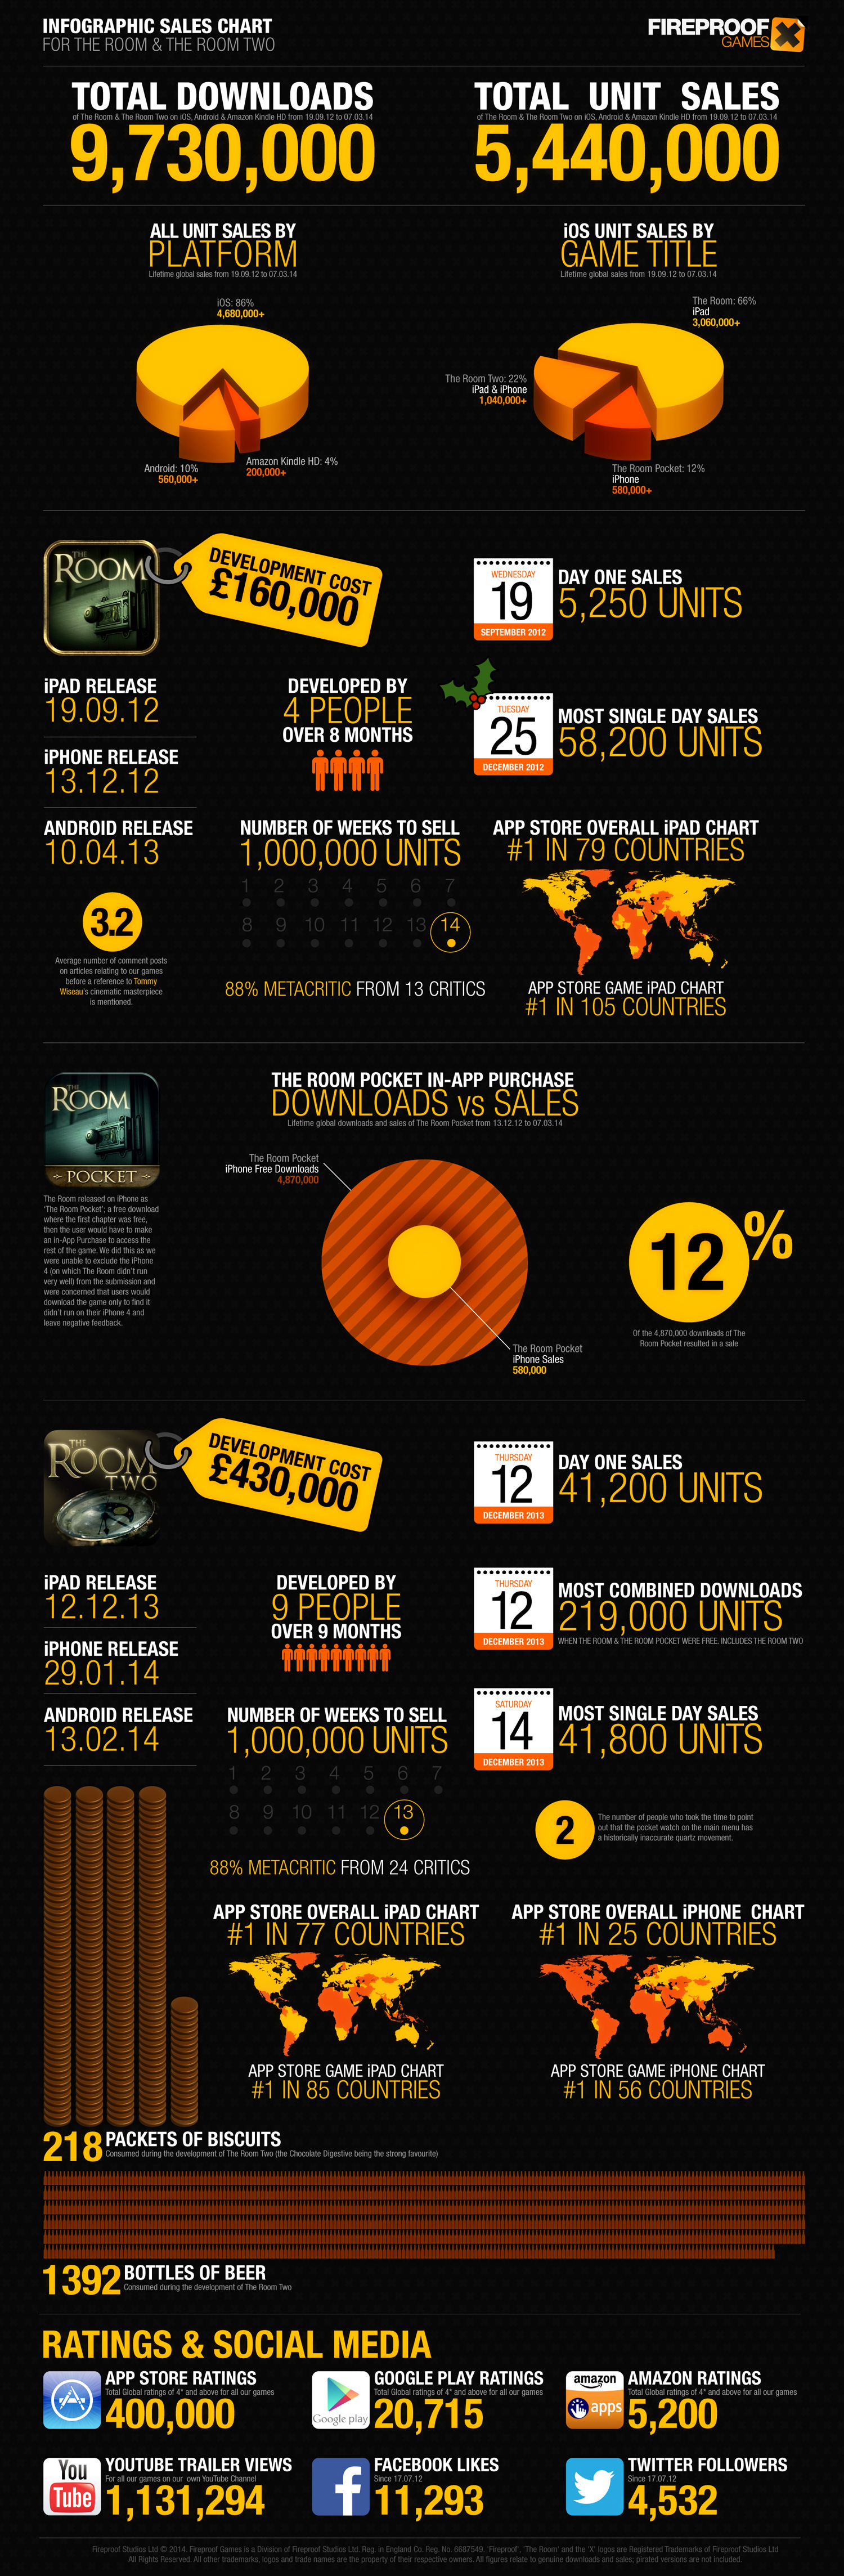 The Room 1 + 2 Sales Infographic